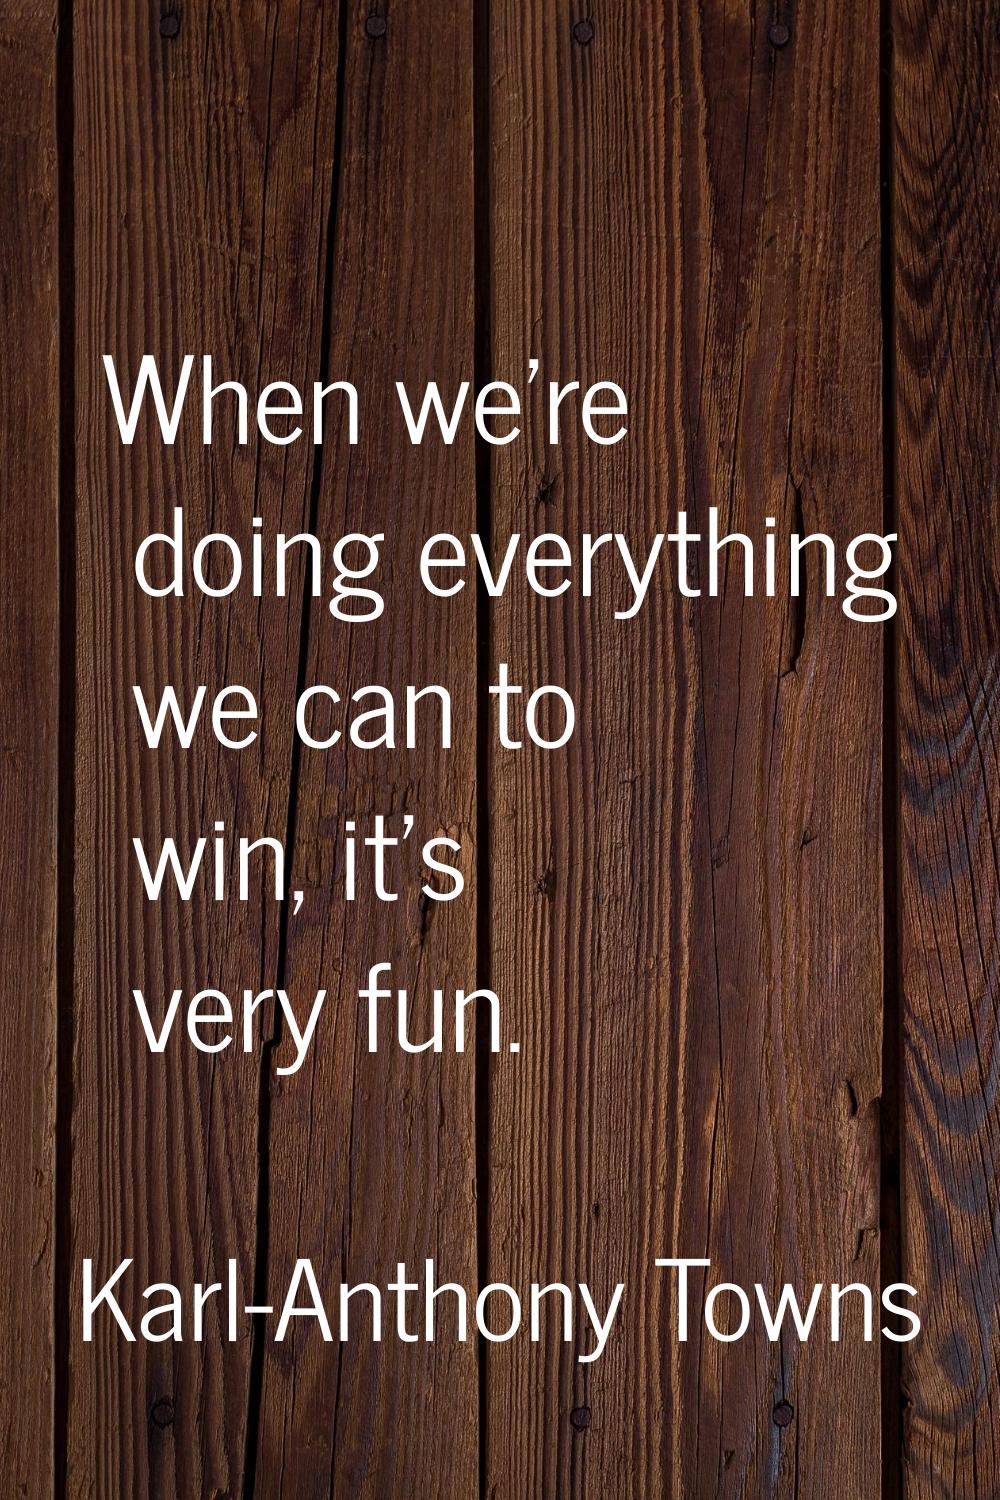 When we're doing everything we can to win, it's very fun.